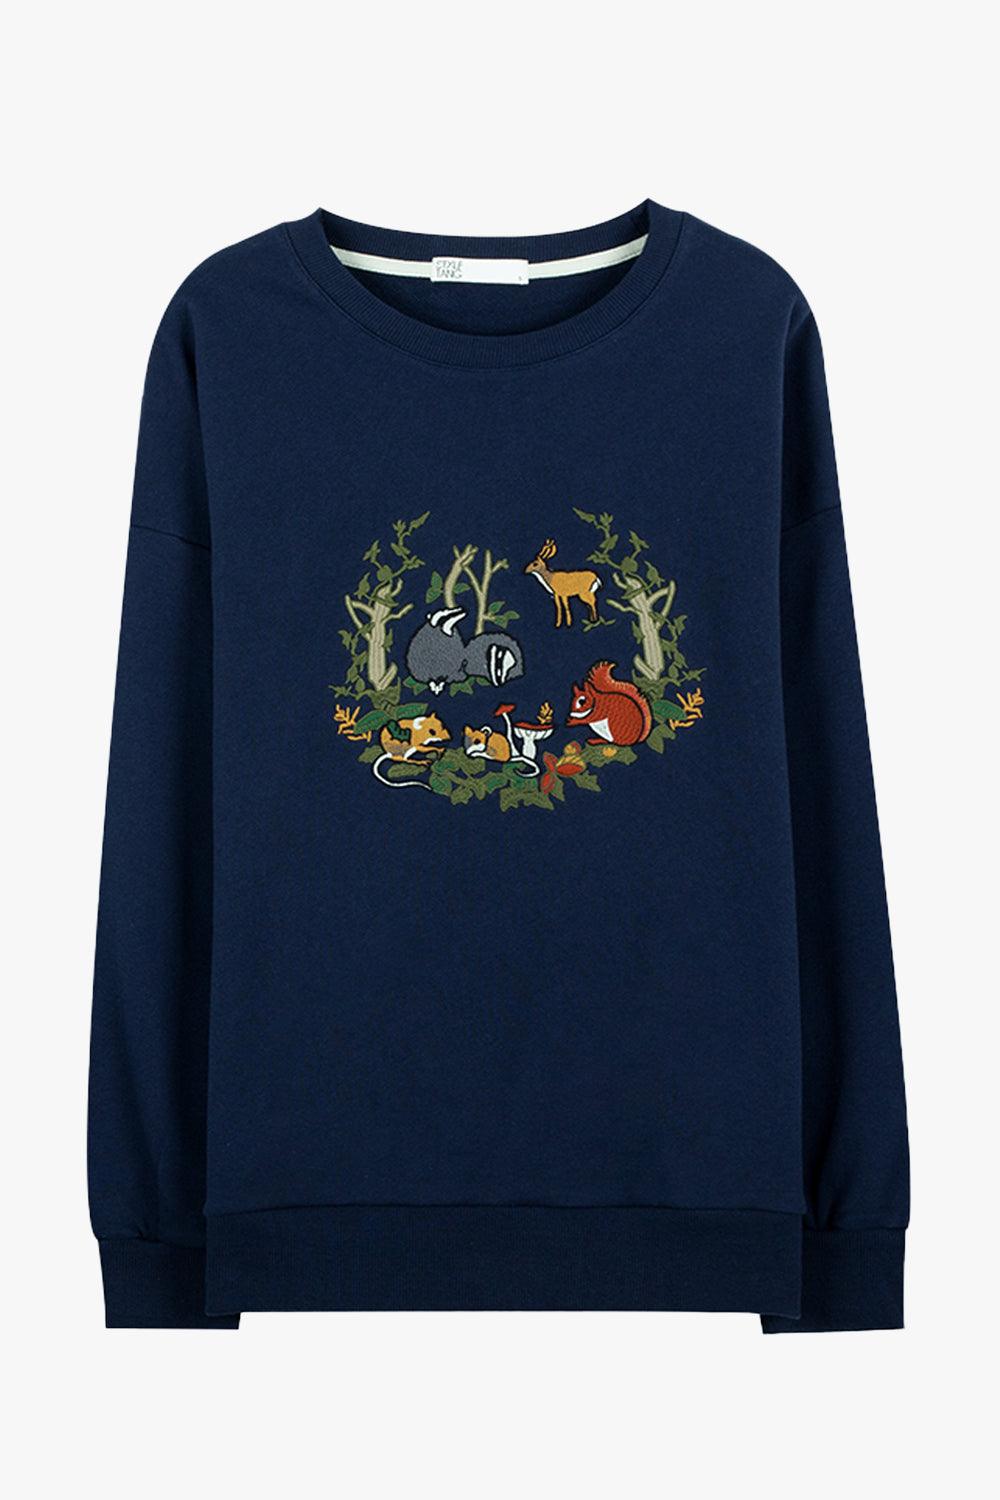 Forest Friends Embroidery Blue Sweatshirt - Aesthetic Clothes Shop